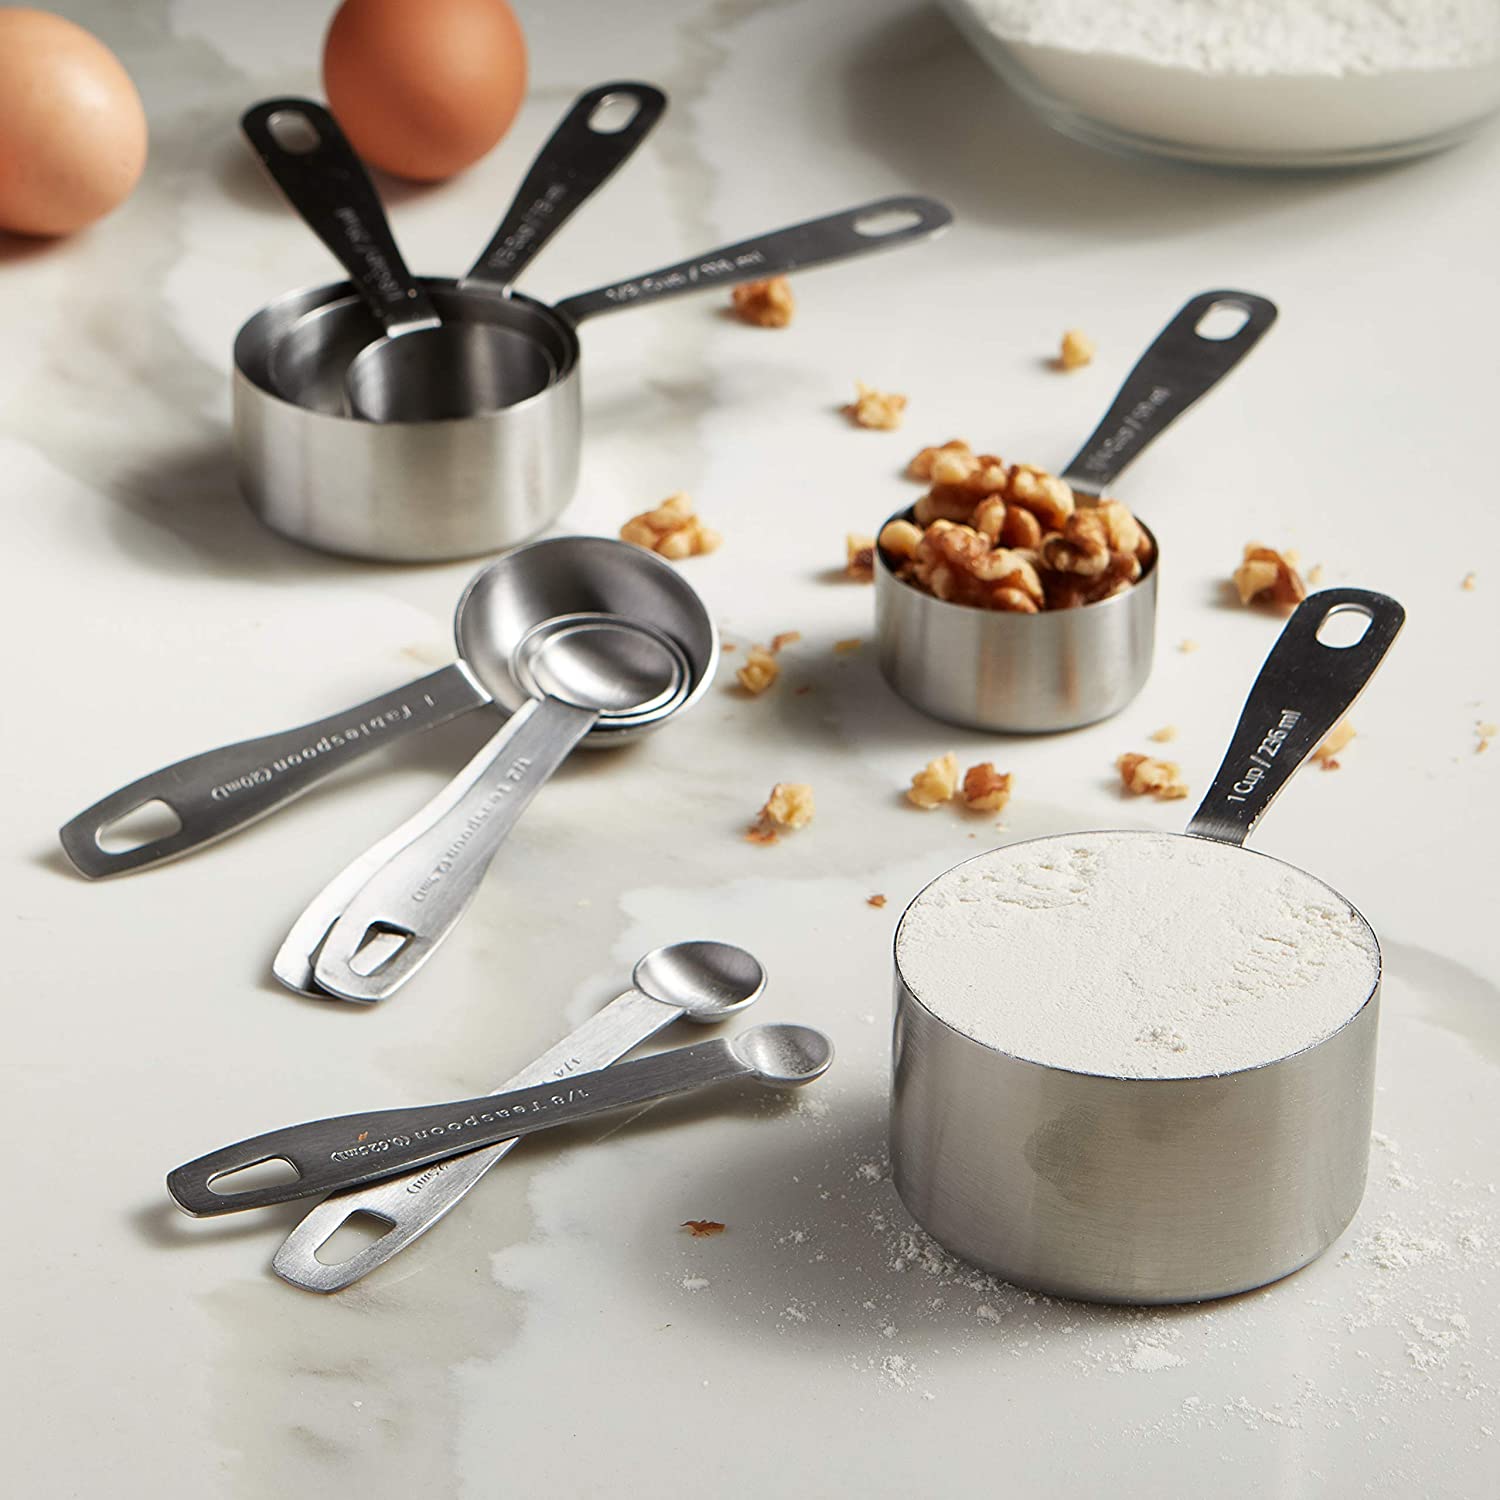 Stainless Measuring Cups Set - Whisk